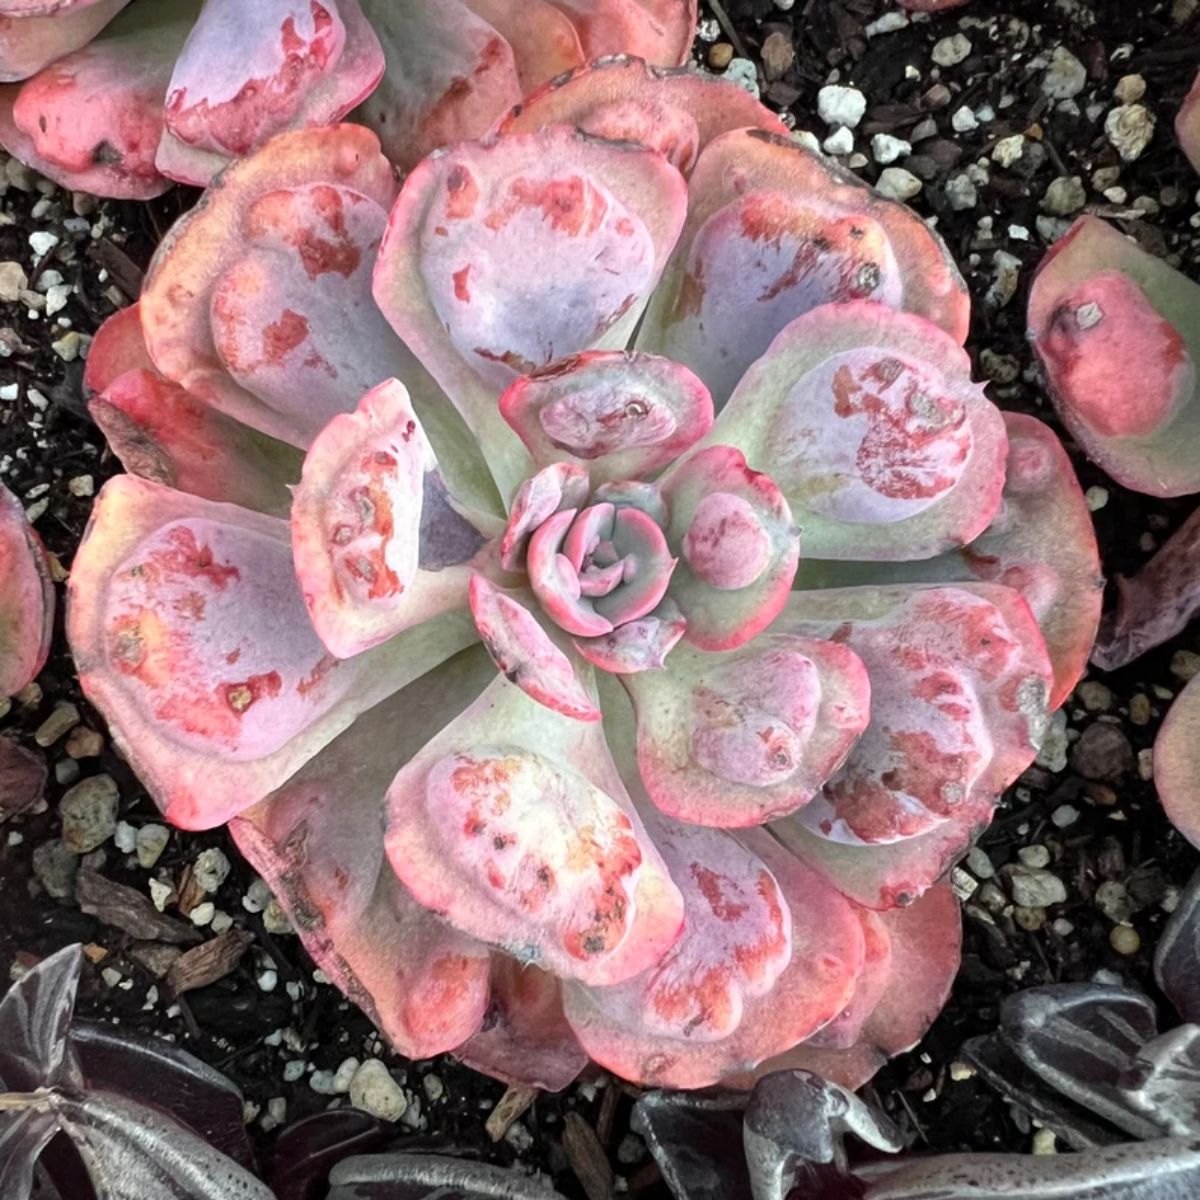 Echeveria, var. Hearts Delight with beautiful pink foliage.